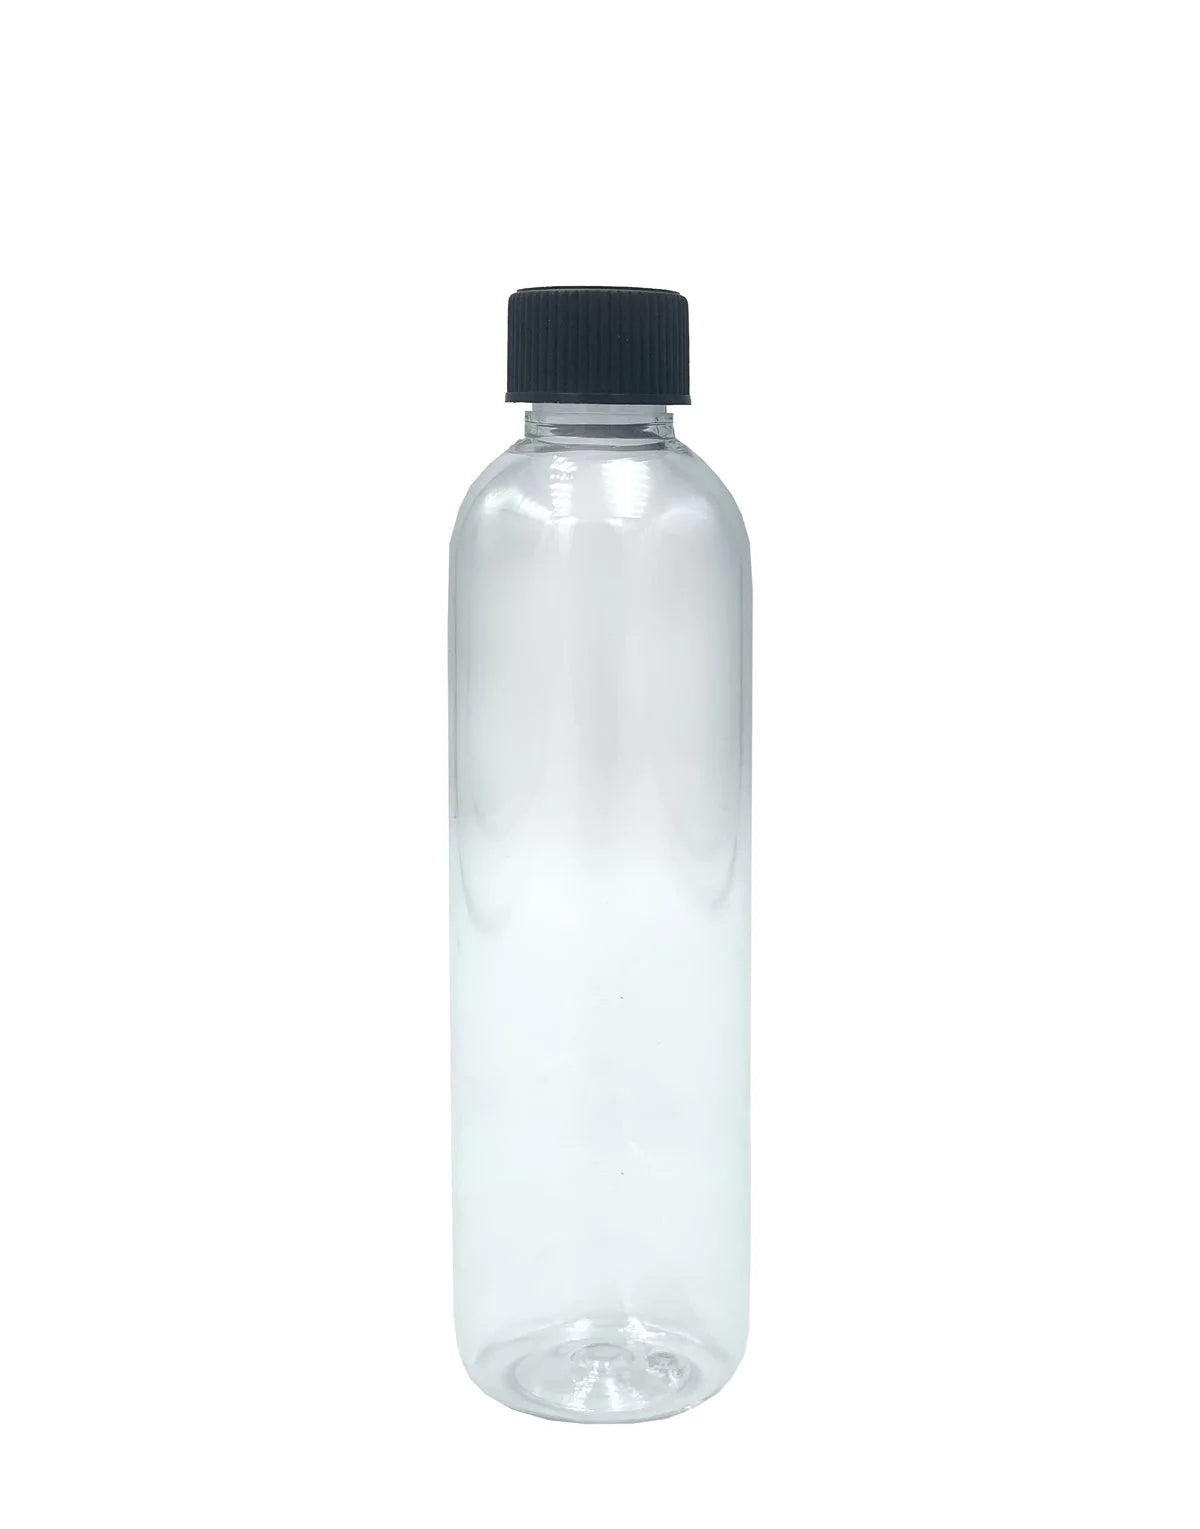 Clear Boston Style Empty Bottle With Child-lock Cap